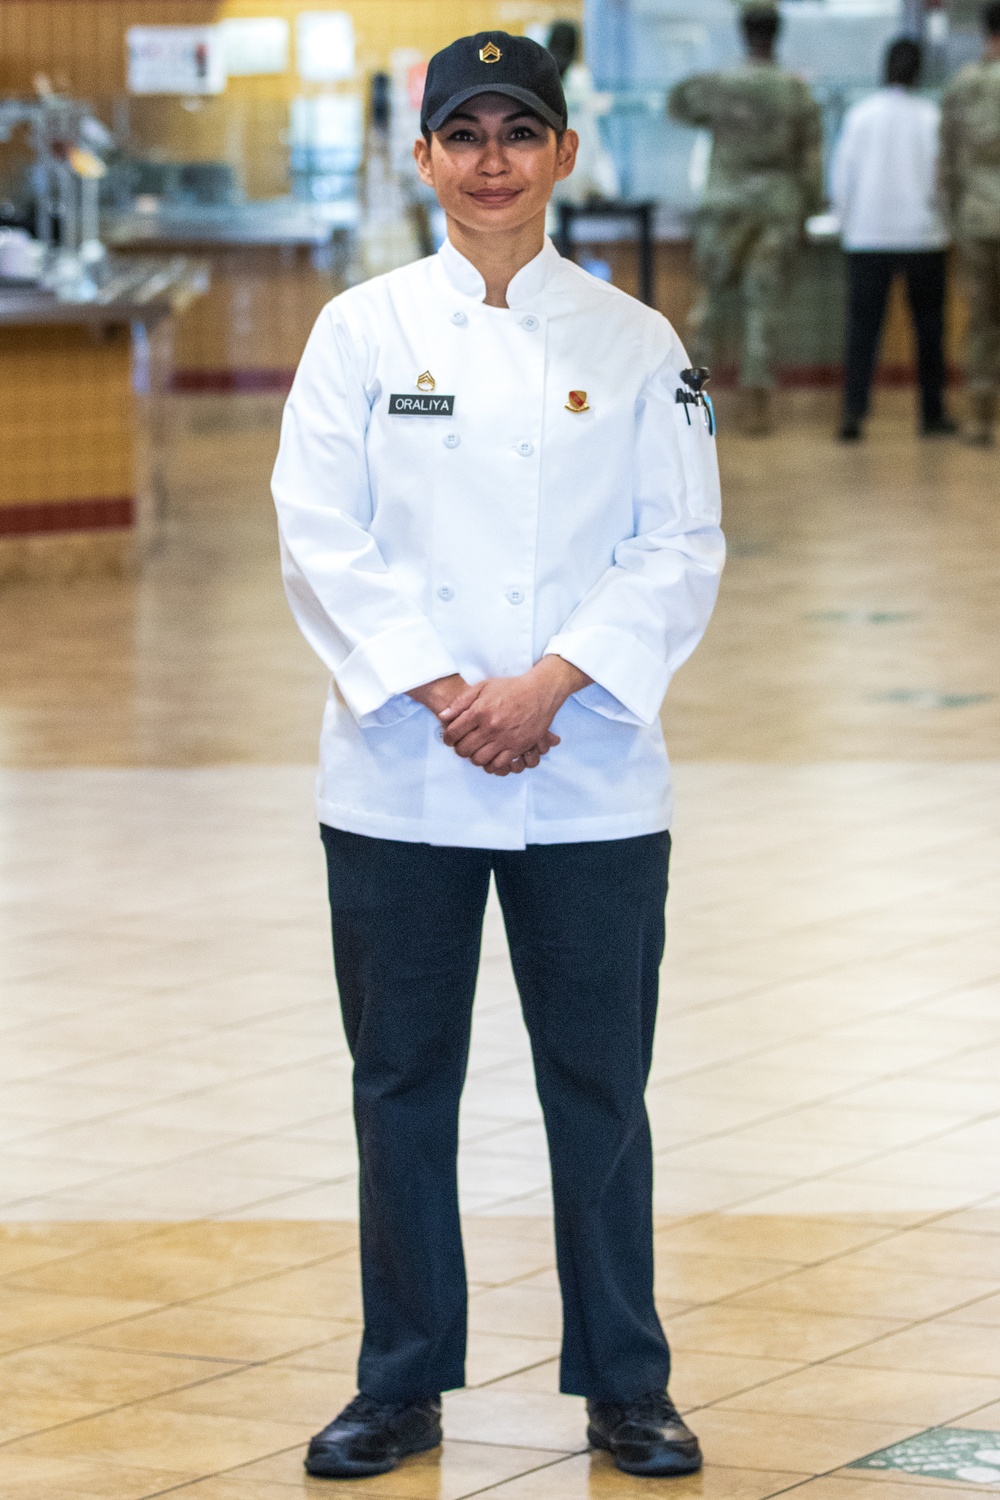 Culinary Specialist Overcomes Childhood Adversity